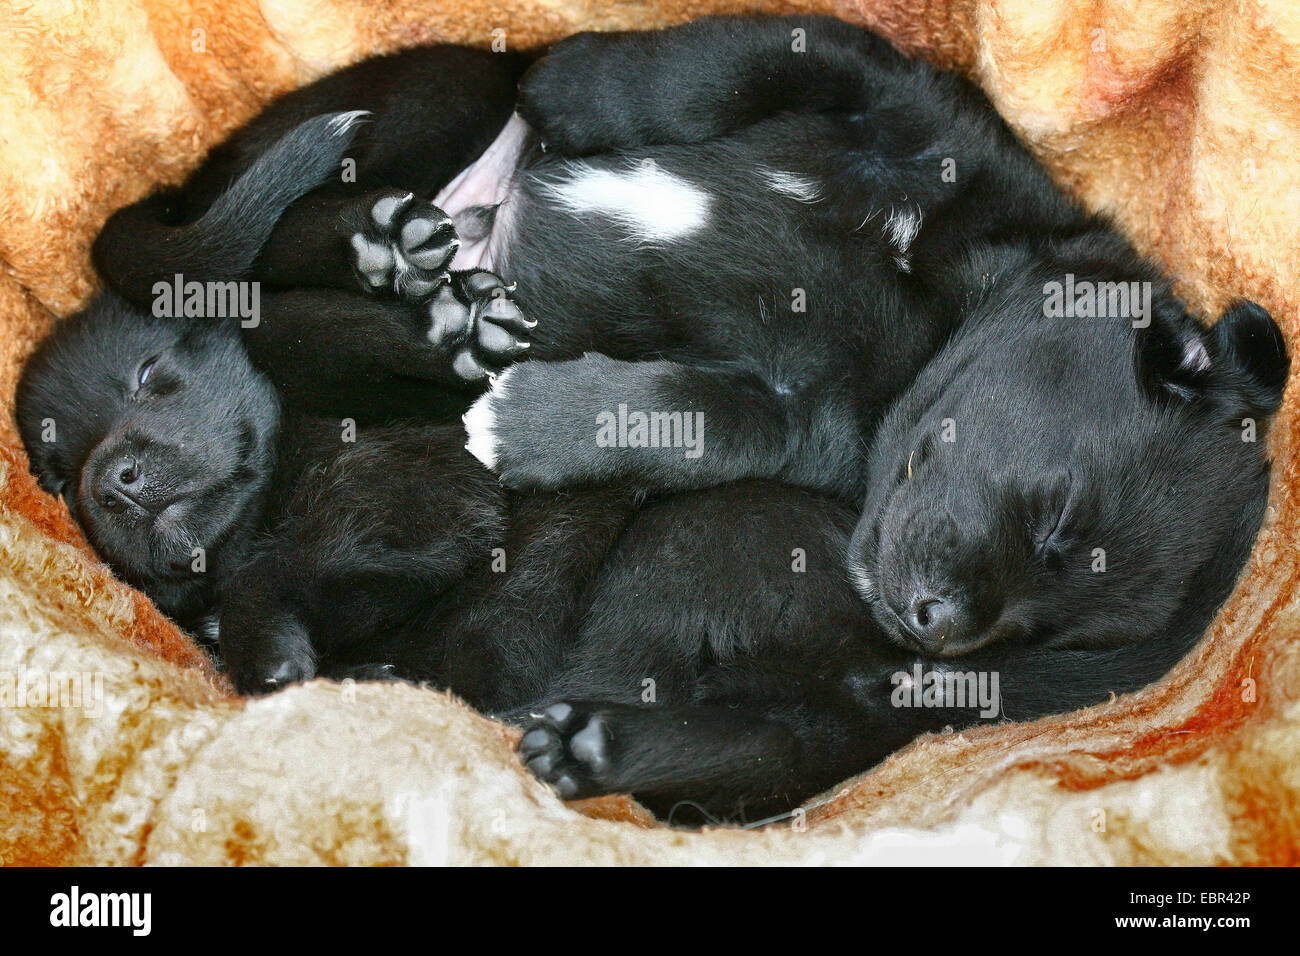 Labrador Retriever (Canis lupus f. familiaris), two dog puppies sleeping in a basket, Germany Stock Photo